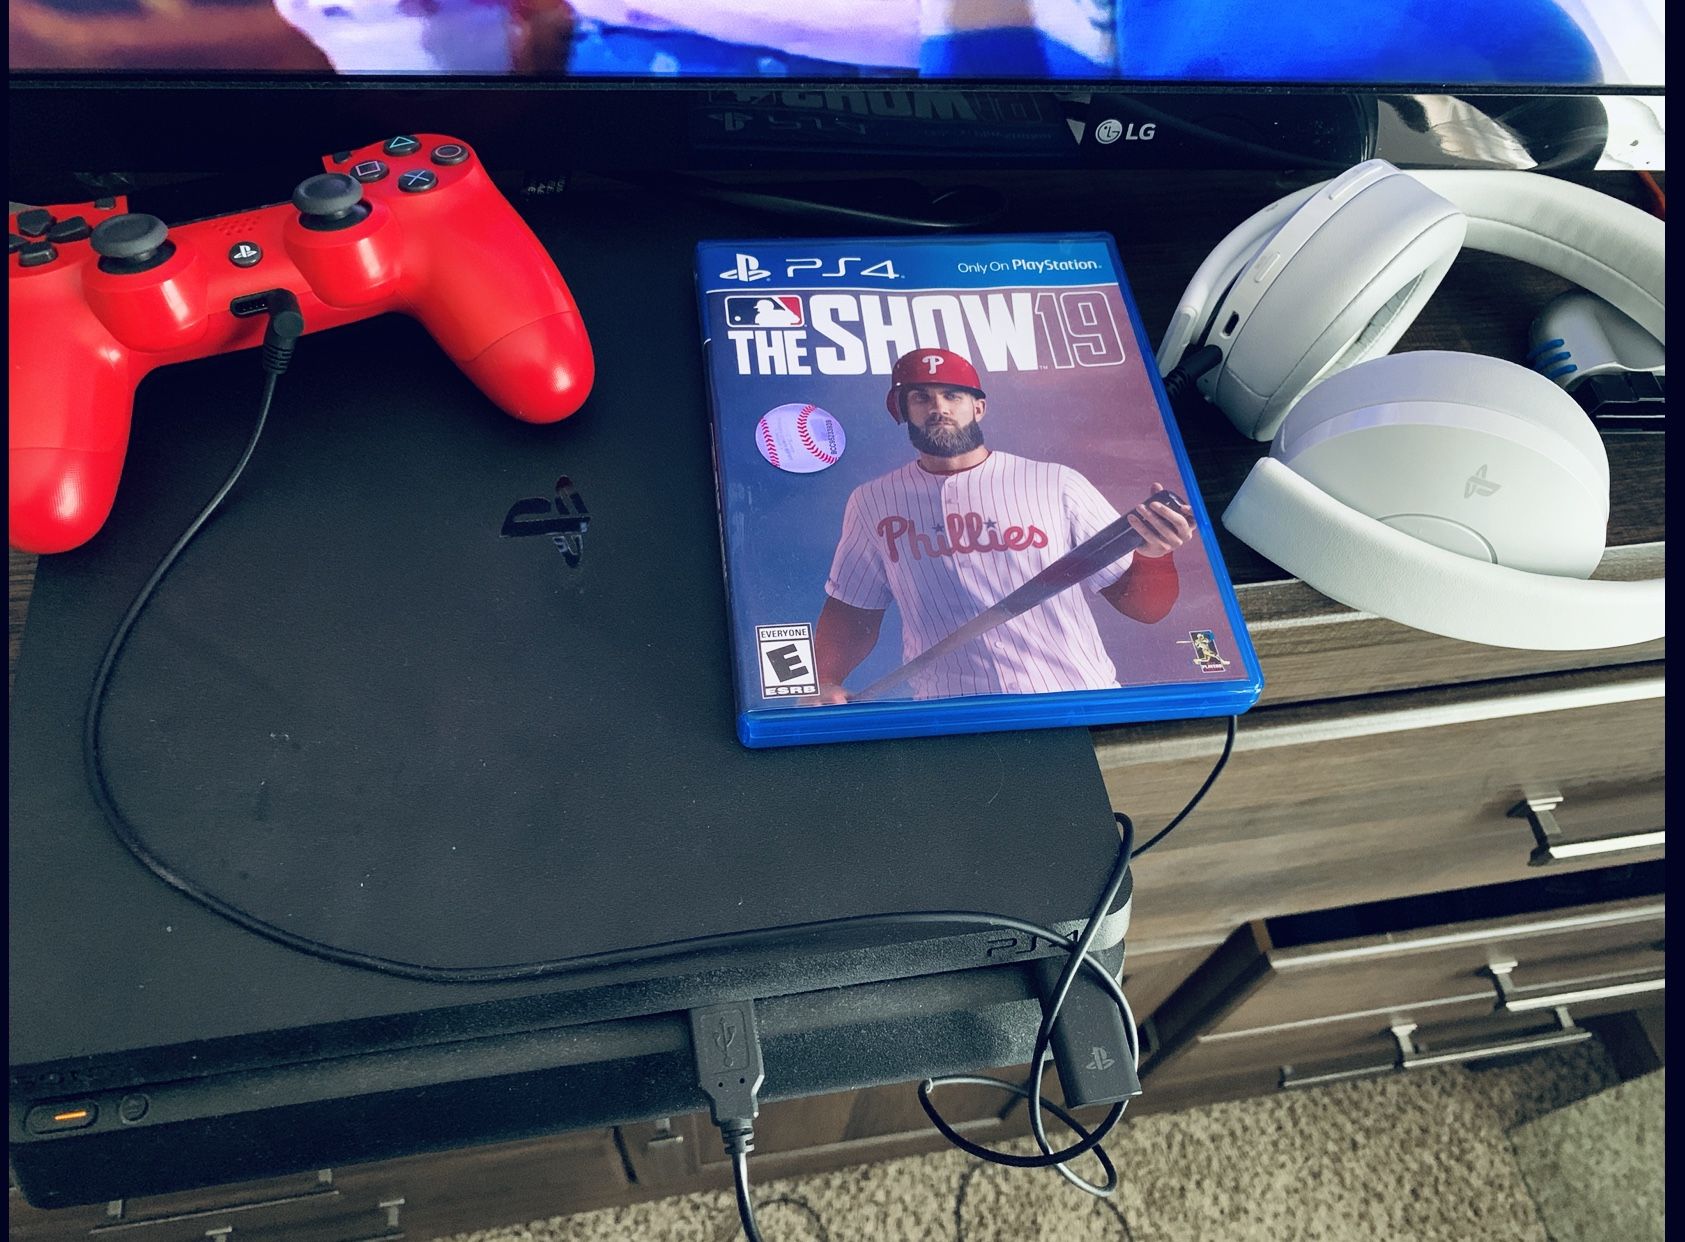 Ps4 slim with ps4 pro headset all cables and the show 19!